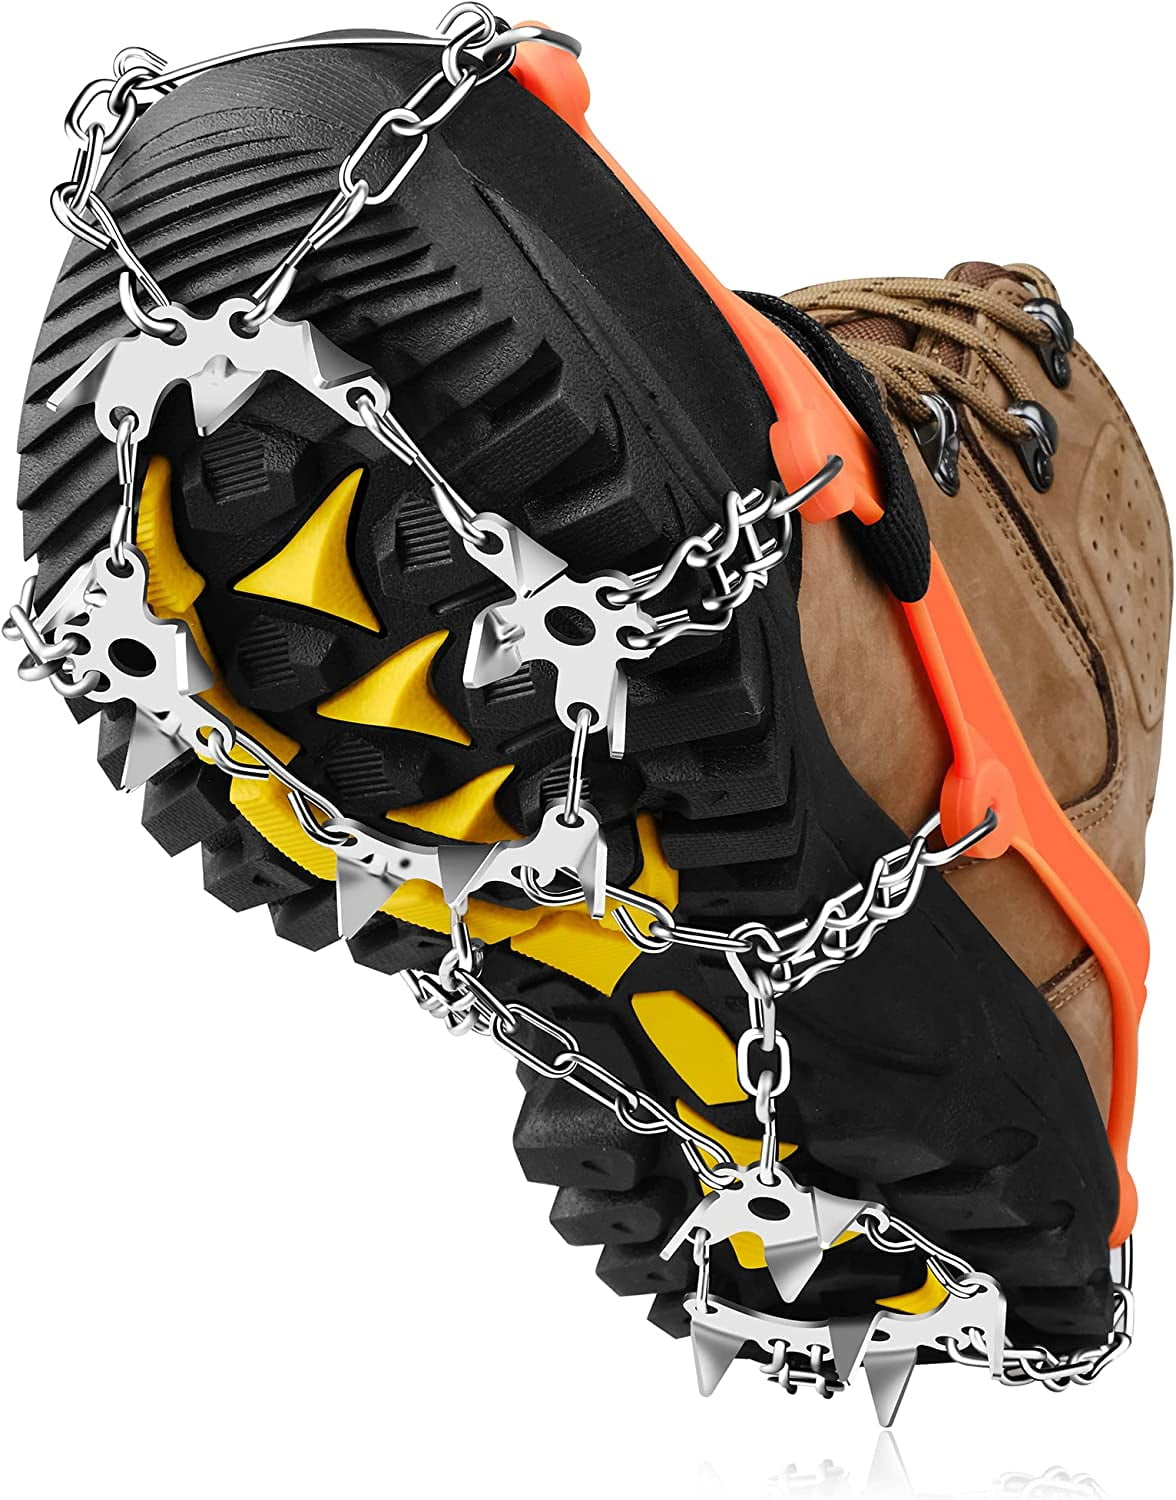 Alpen Bears Premium Crampons for Mountain Boots with 19 Stainless Steel Spikes - Professional Anti-Slip Boot Spikes for Snow & Ice - Winter, Ice